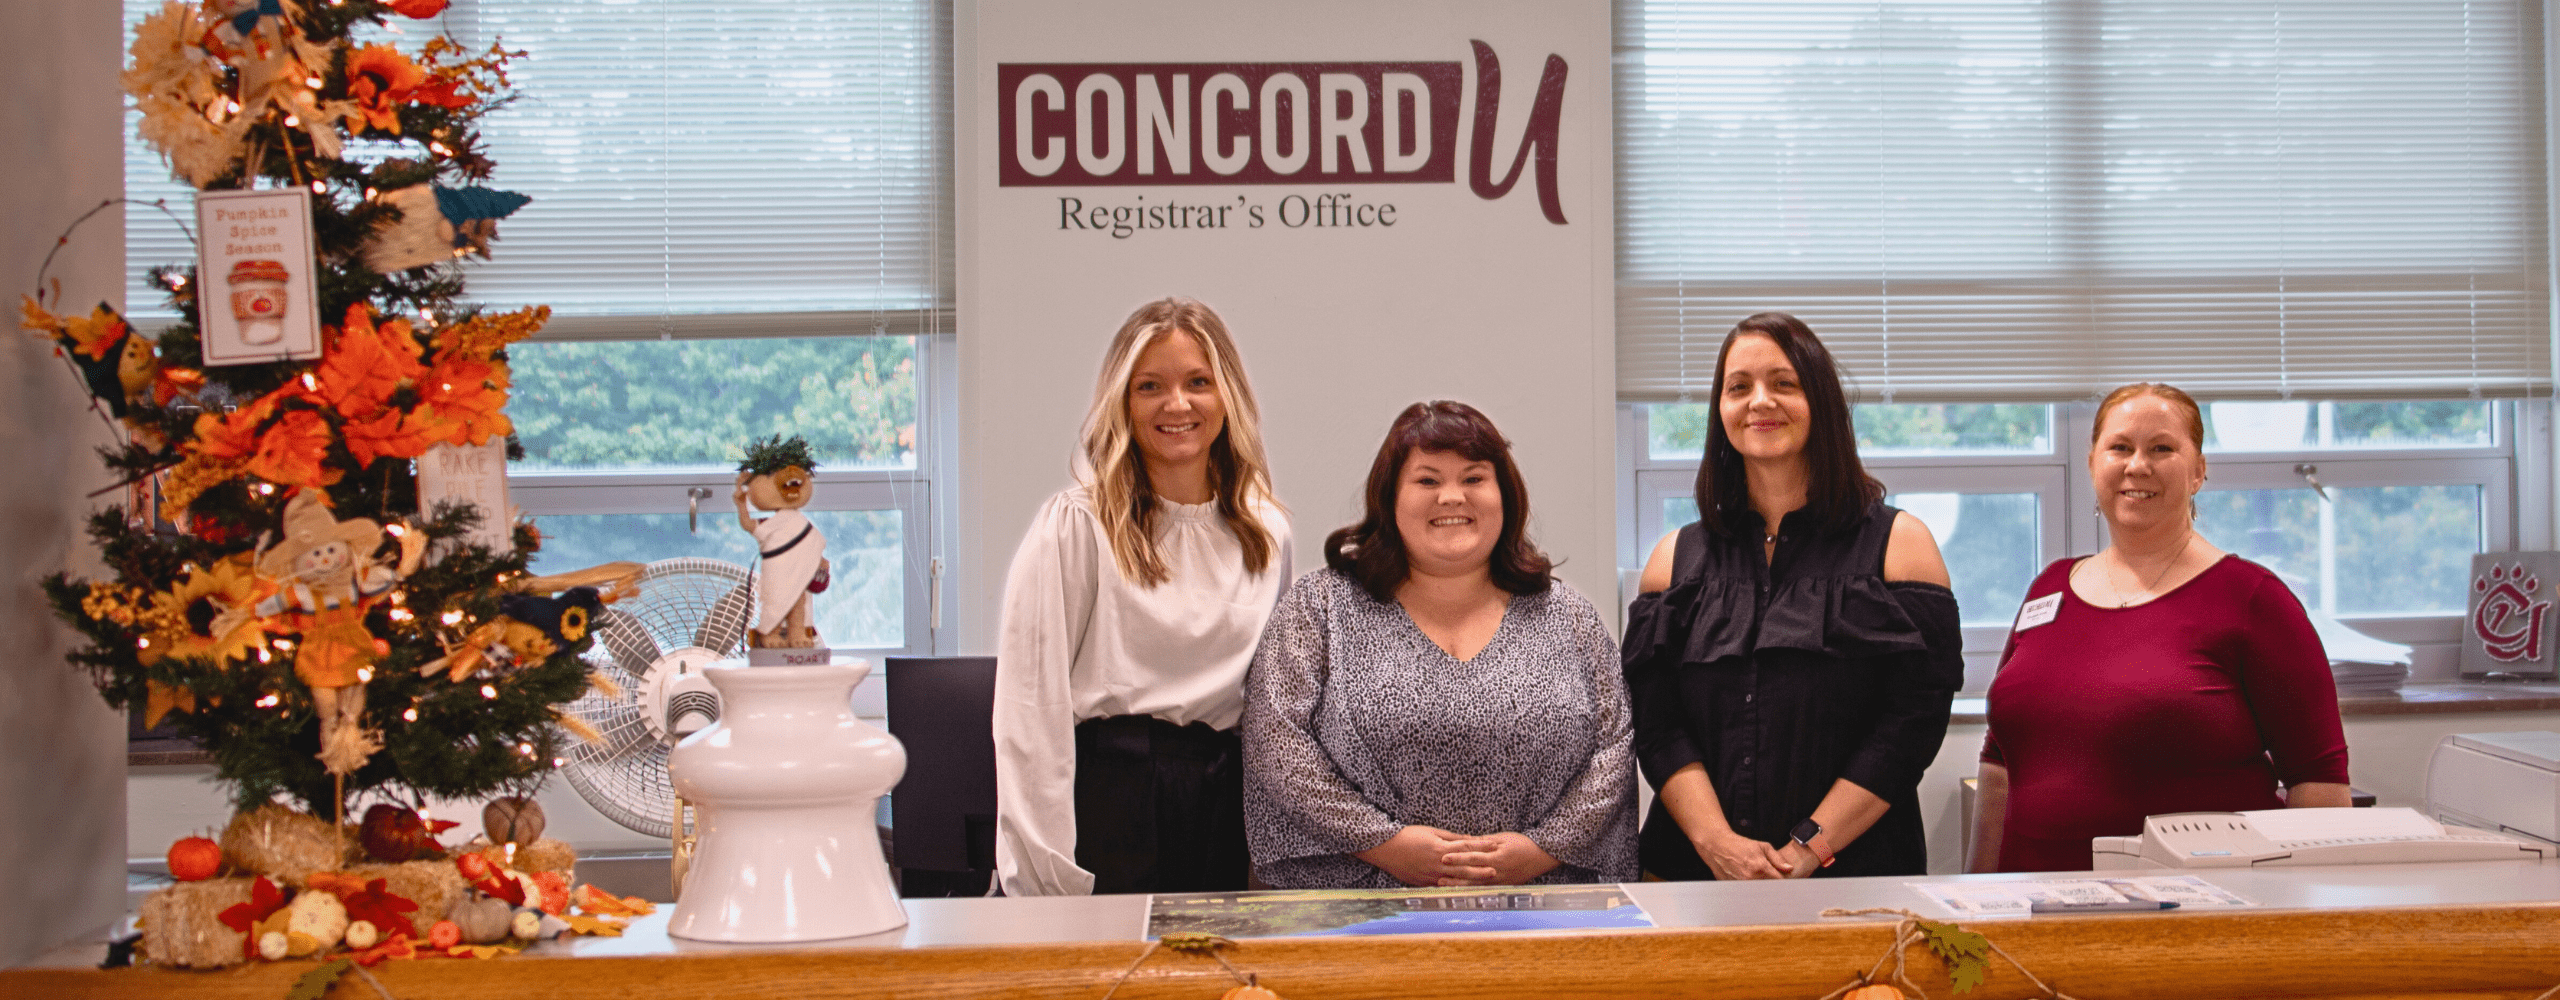 Emily Miller, Brianna Lipscomb, Lucinda Gonderman, and Sheilah Sites pictures behind the Concord University Registrar's Office front desk